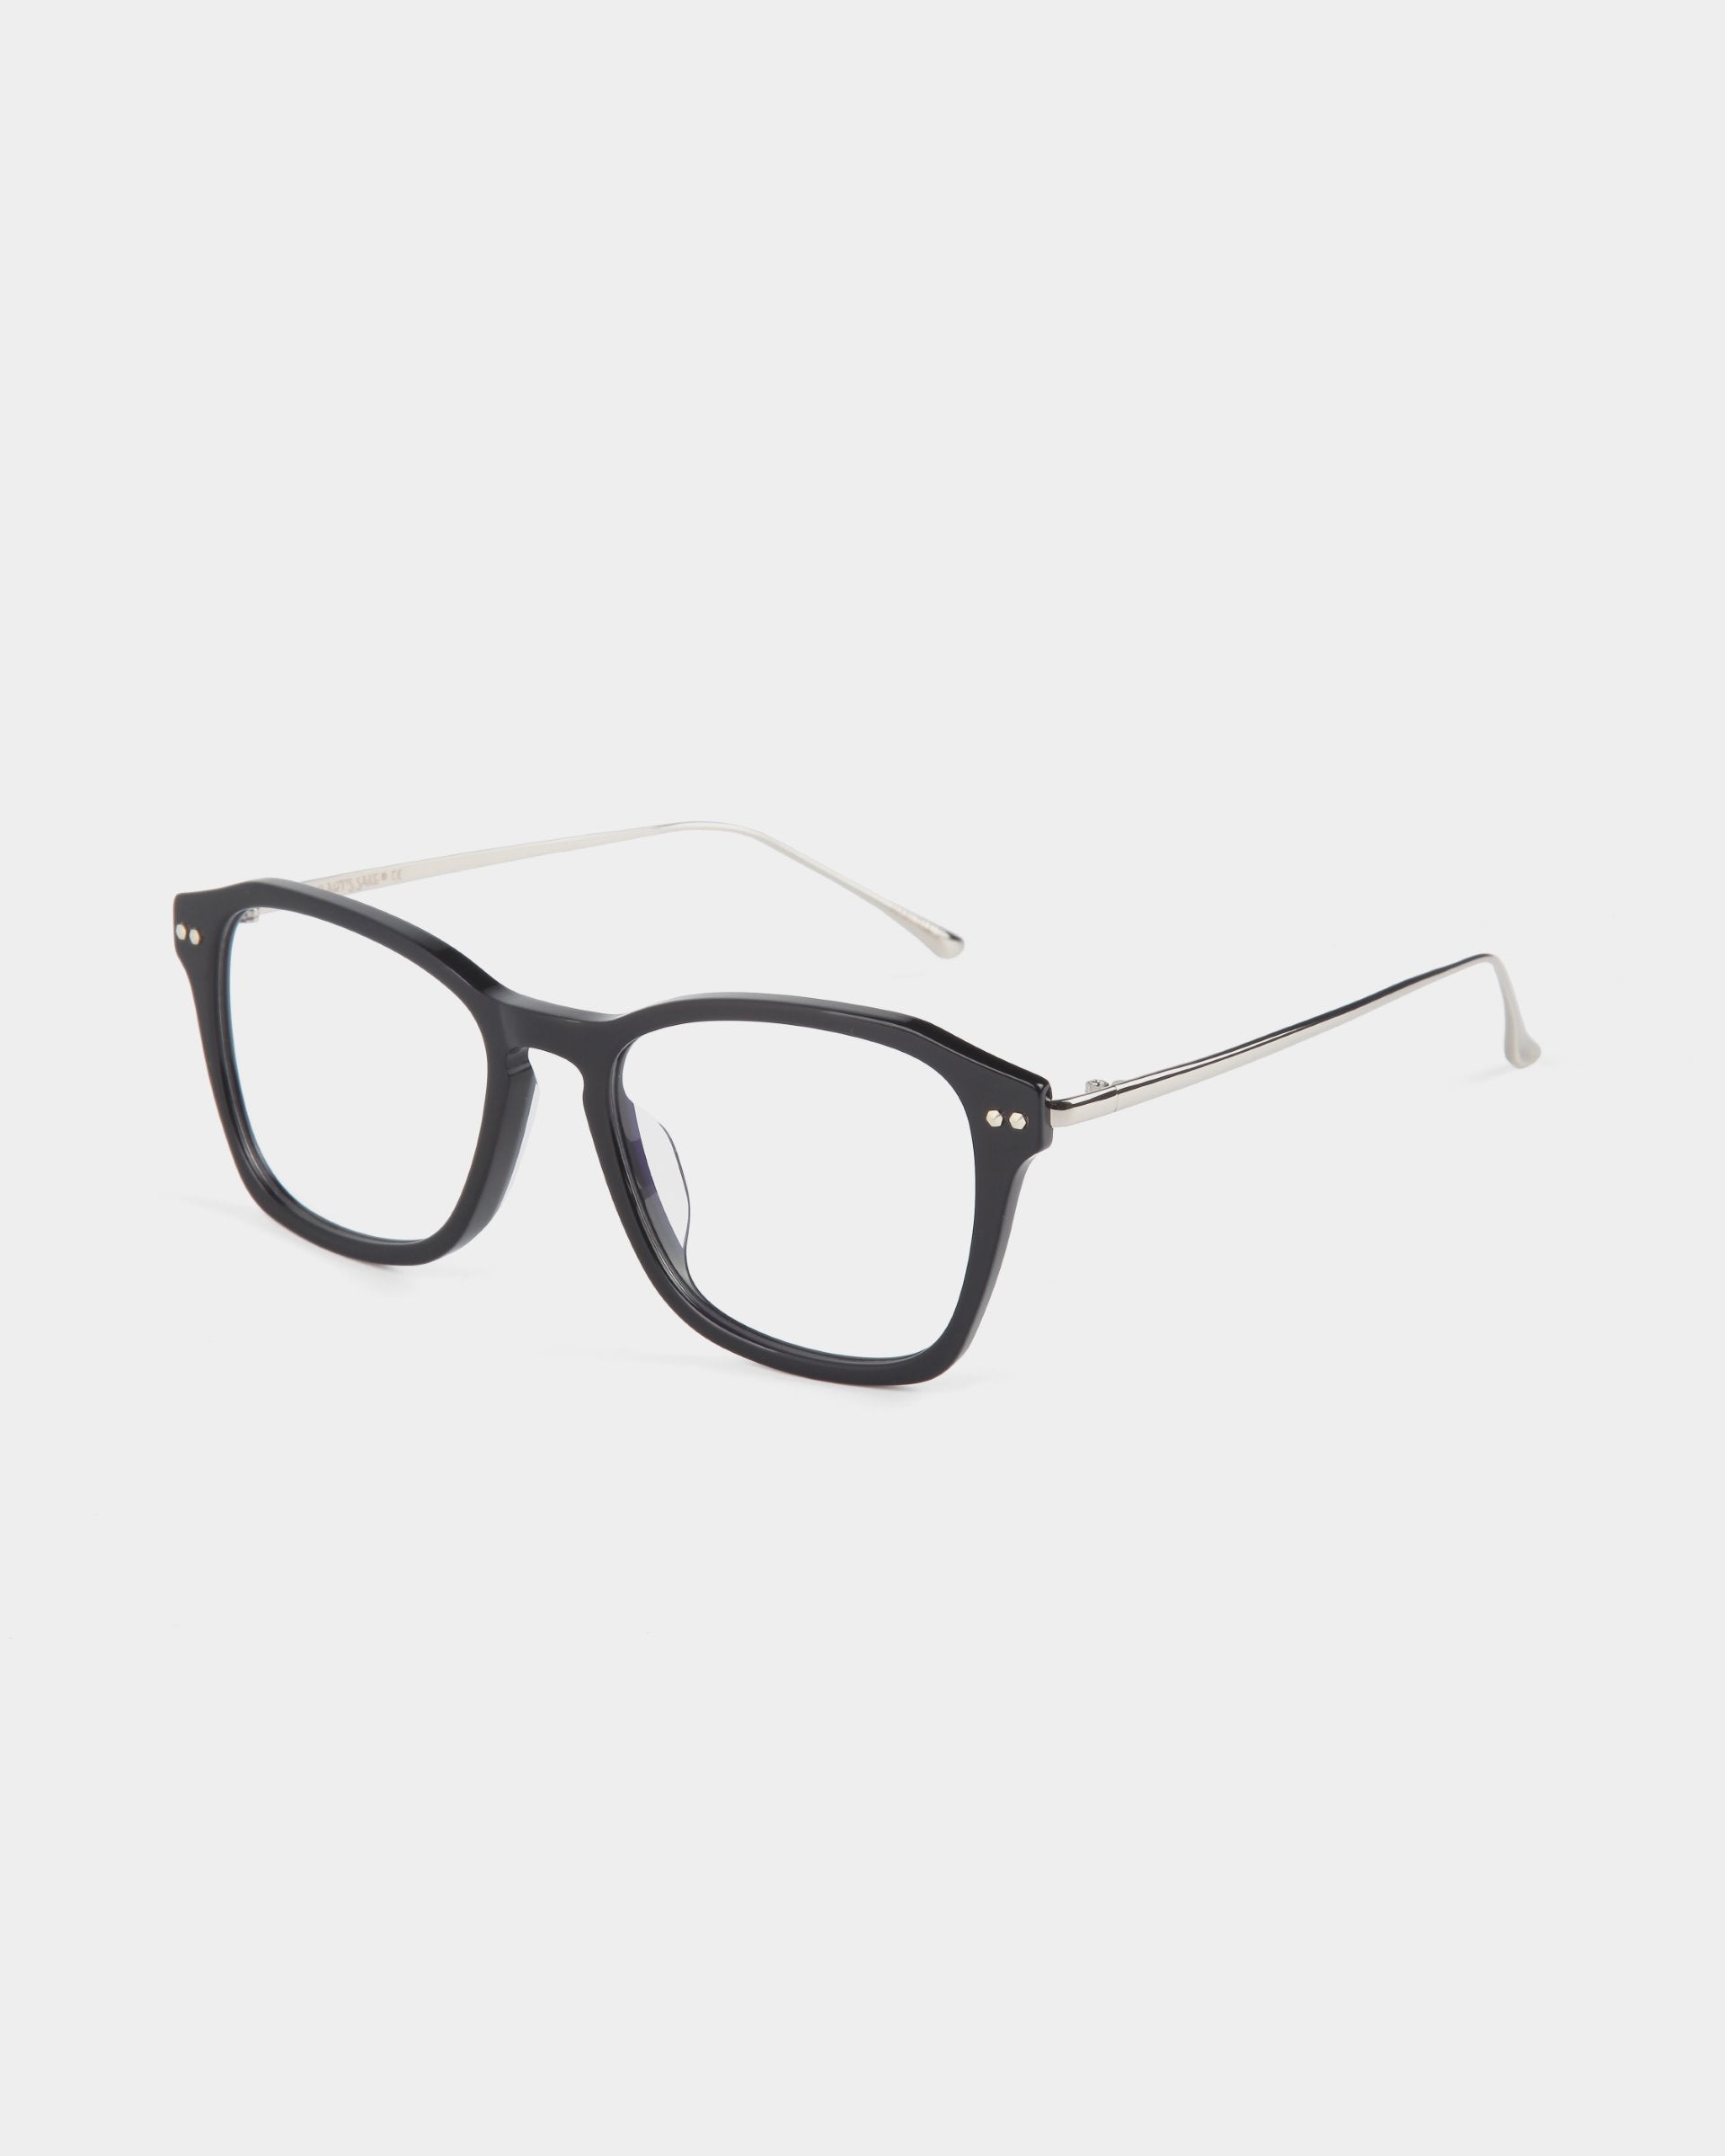 A pair of eyeglasses with black rectangular frames and silver temples is shown against a plain white background. The For Art&#39;s Sake® Morris glasses, featuring stainless steel frames, have clear lenses and small silver dots on the front edges near the hinges.